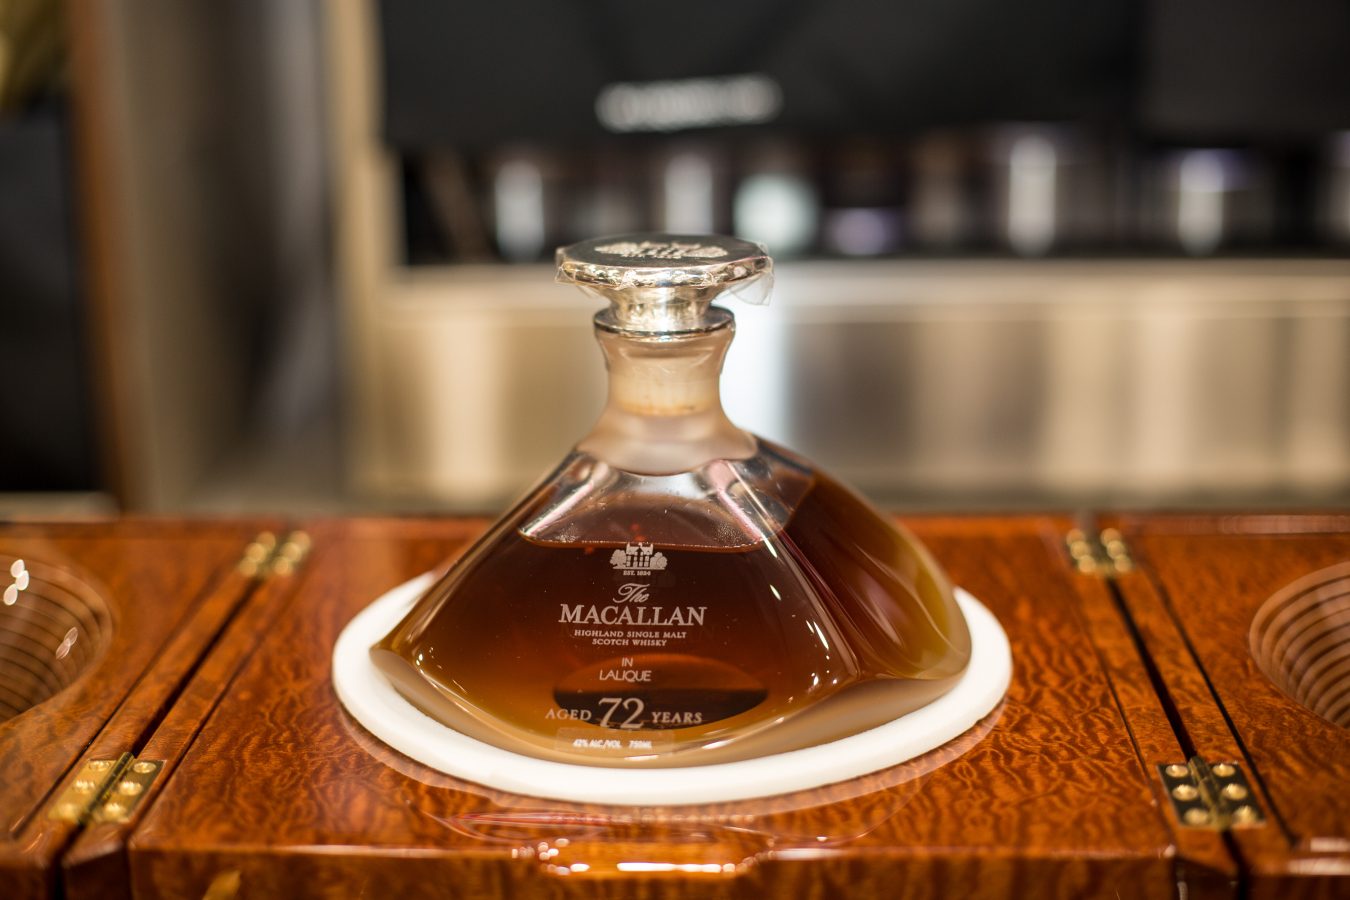 The Macallan 72 Years Old Montecristo